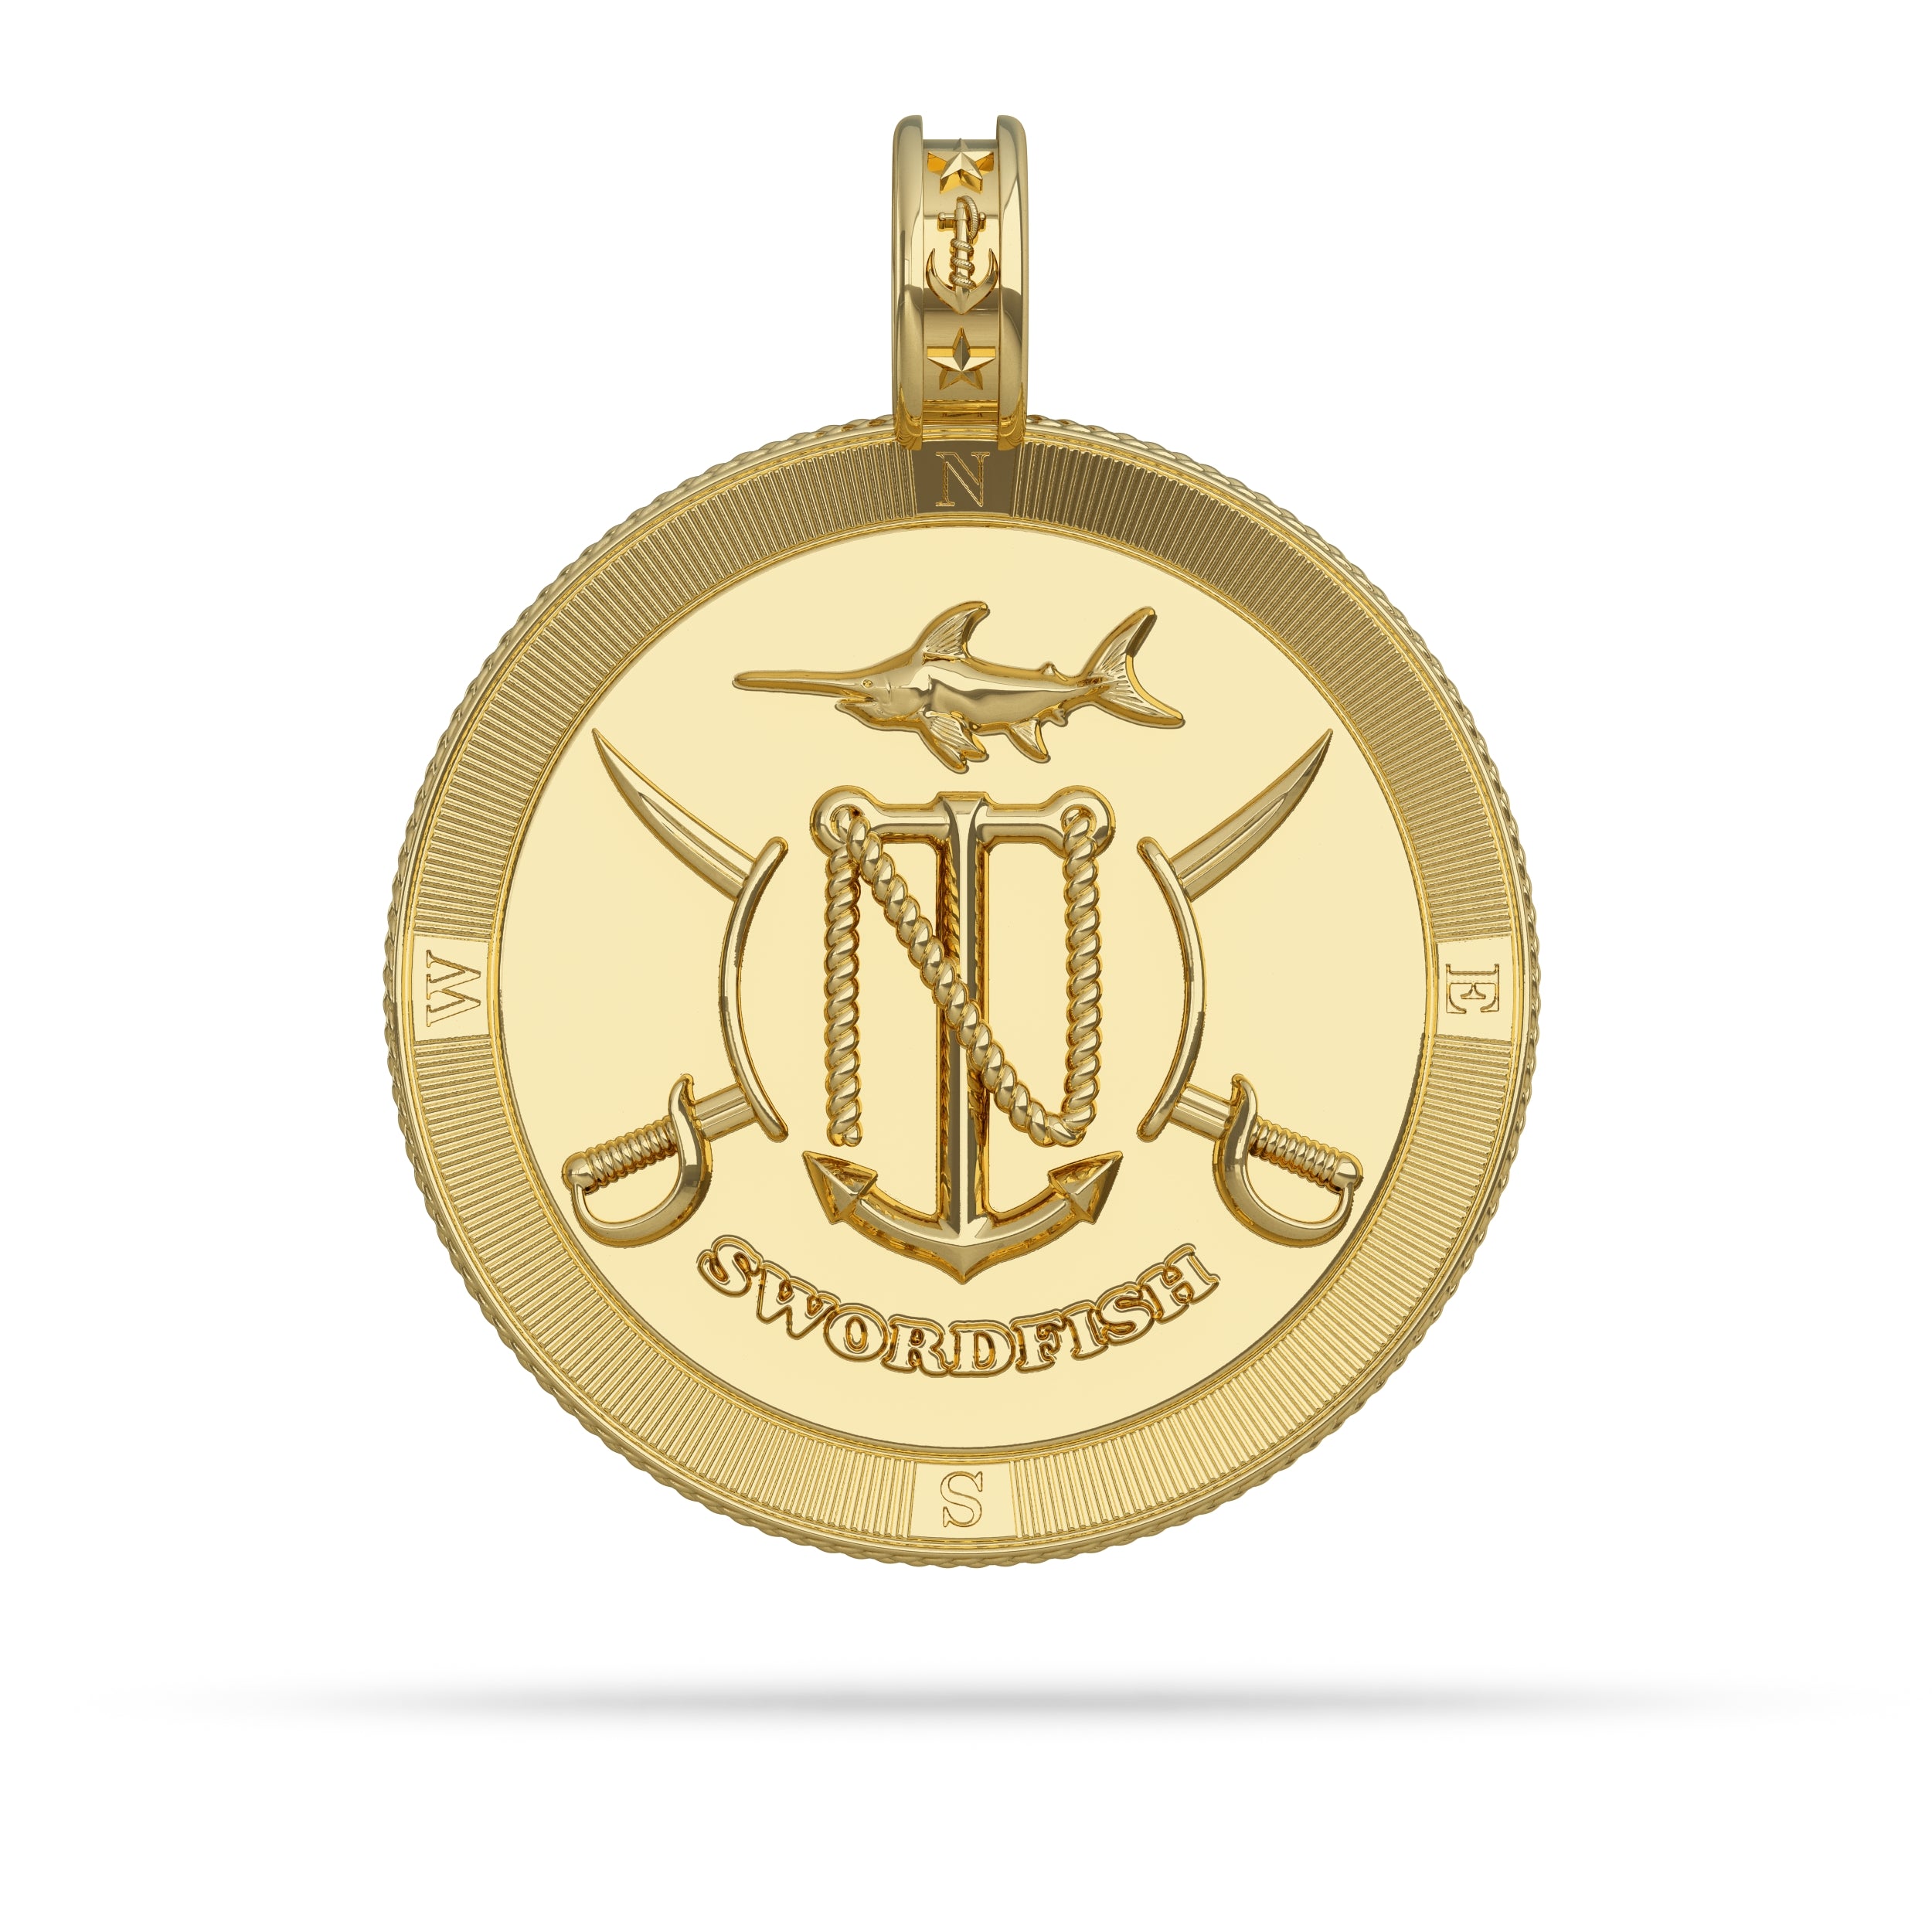  Swordfish Compass Medallion Pendant Large in Gold by Nautical Treasure